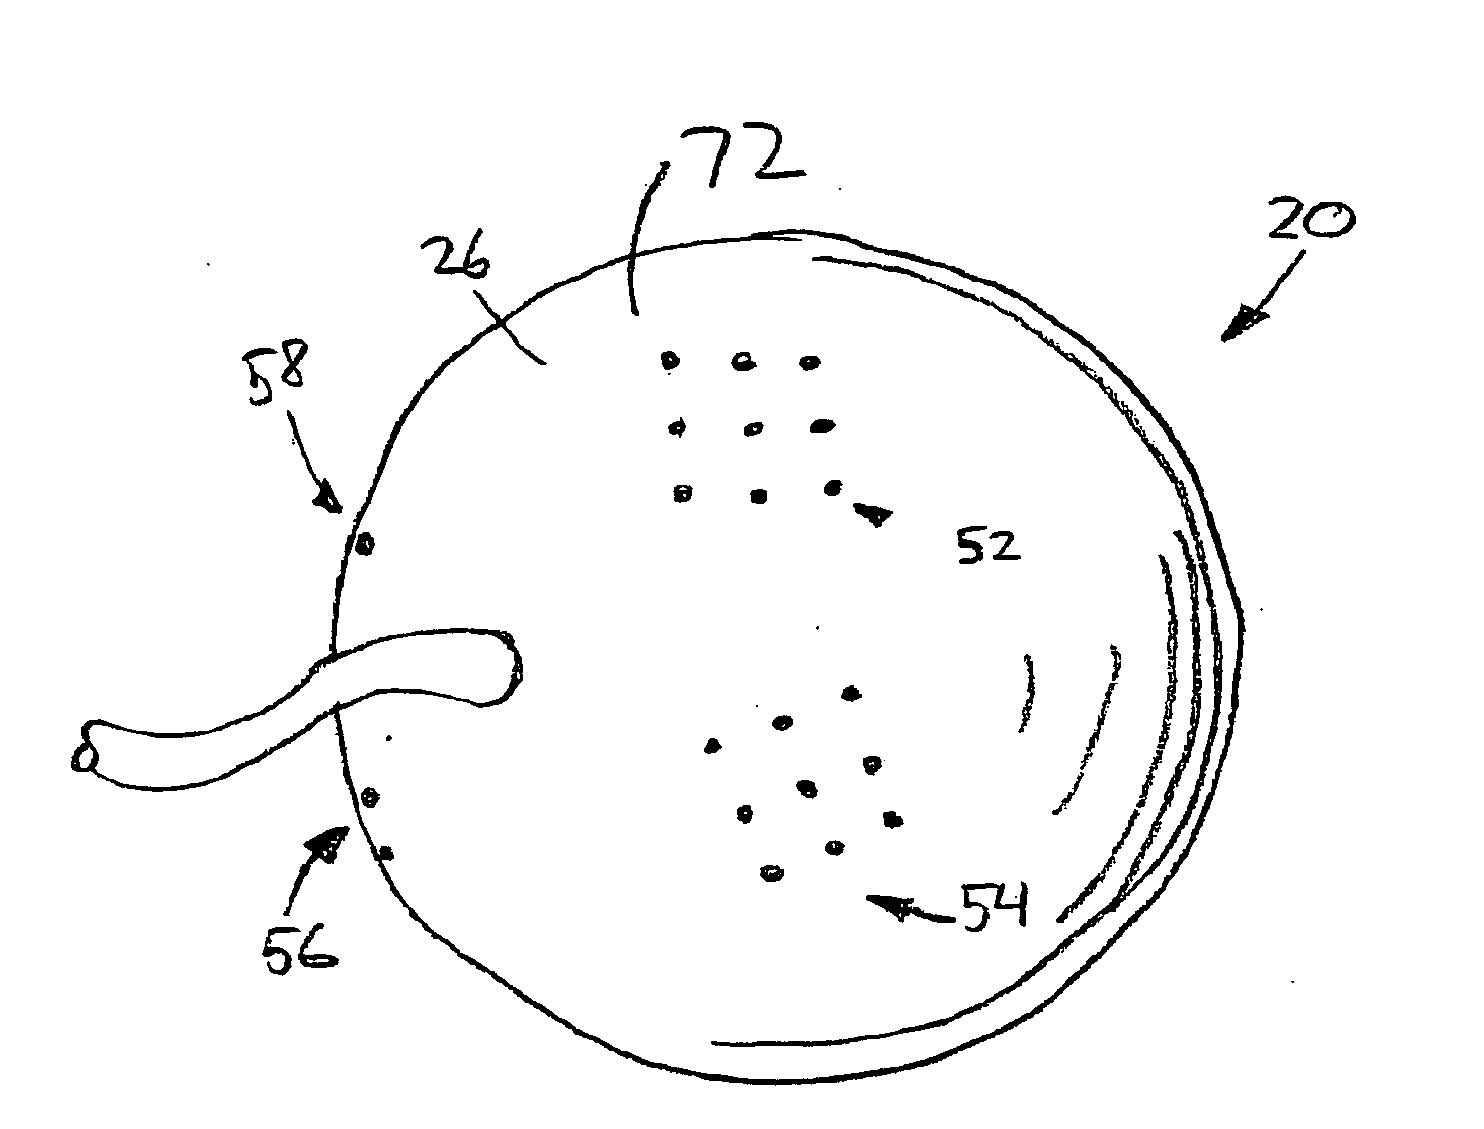 System and Method for Treating Connective Tissue